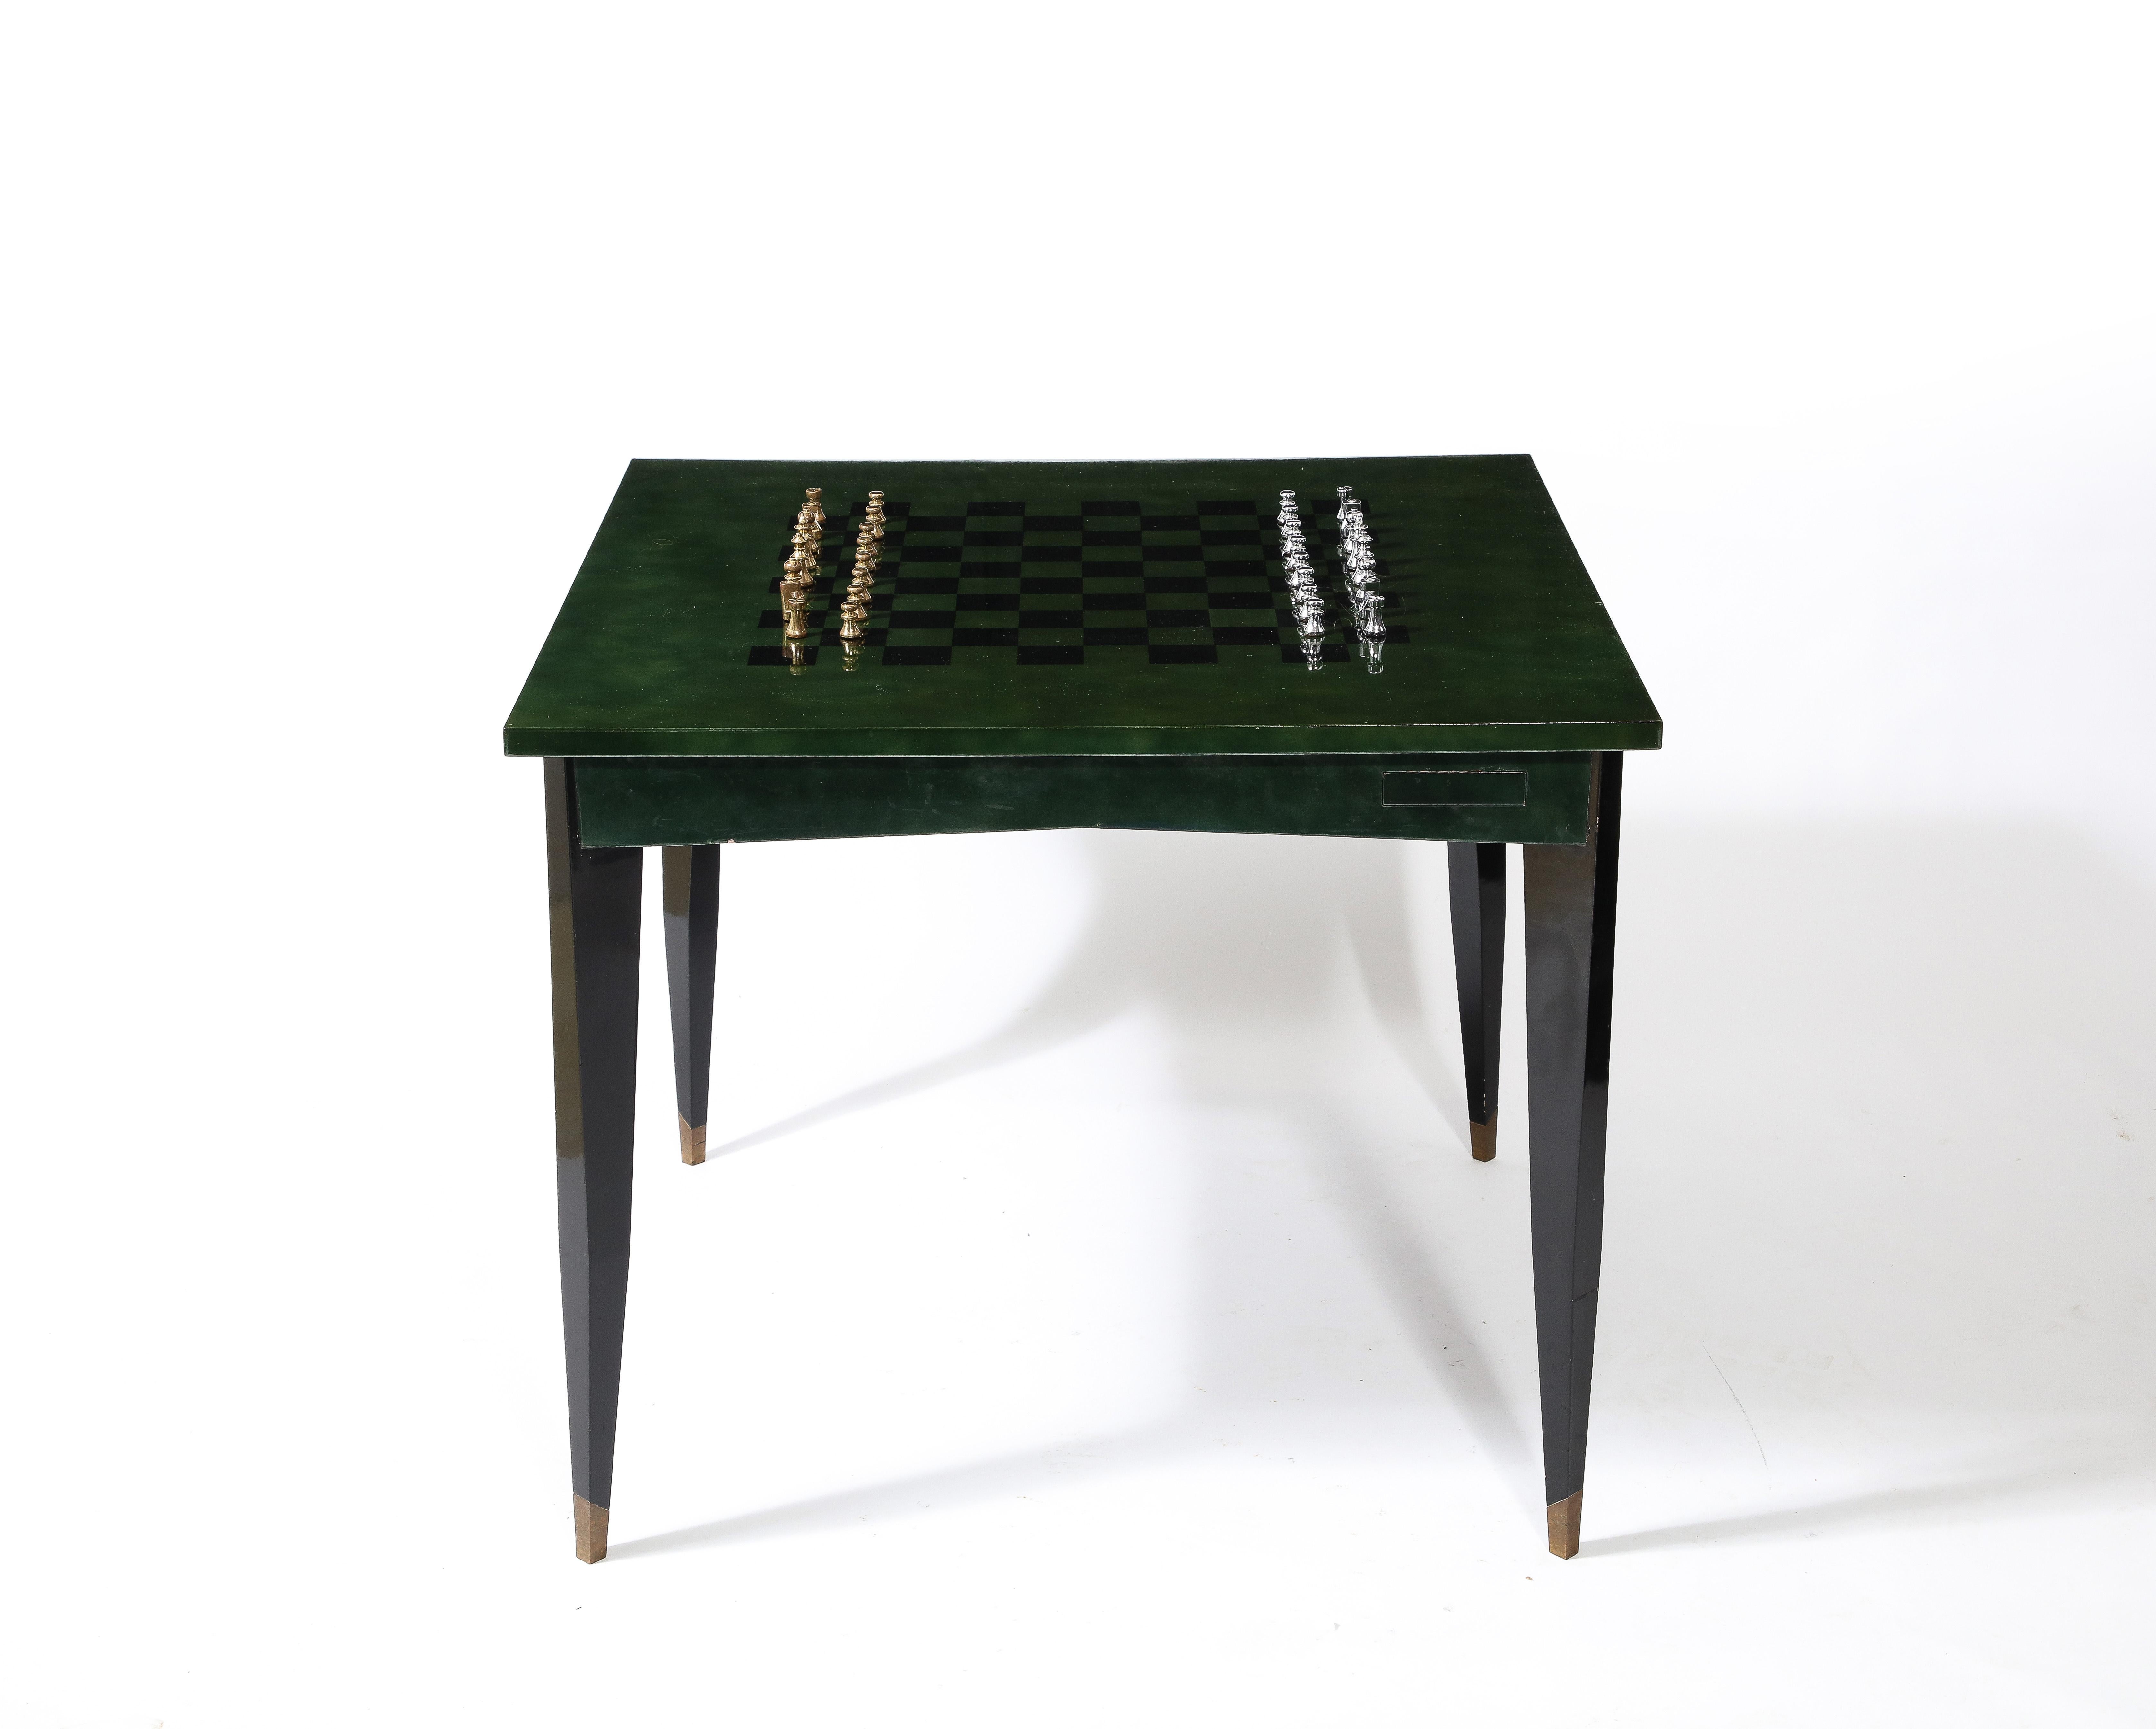 Raphael Raffel Game Table in Green & Black Beka Lacquer, France 1950's For Sale 5